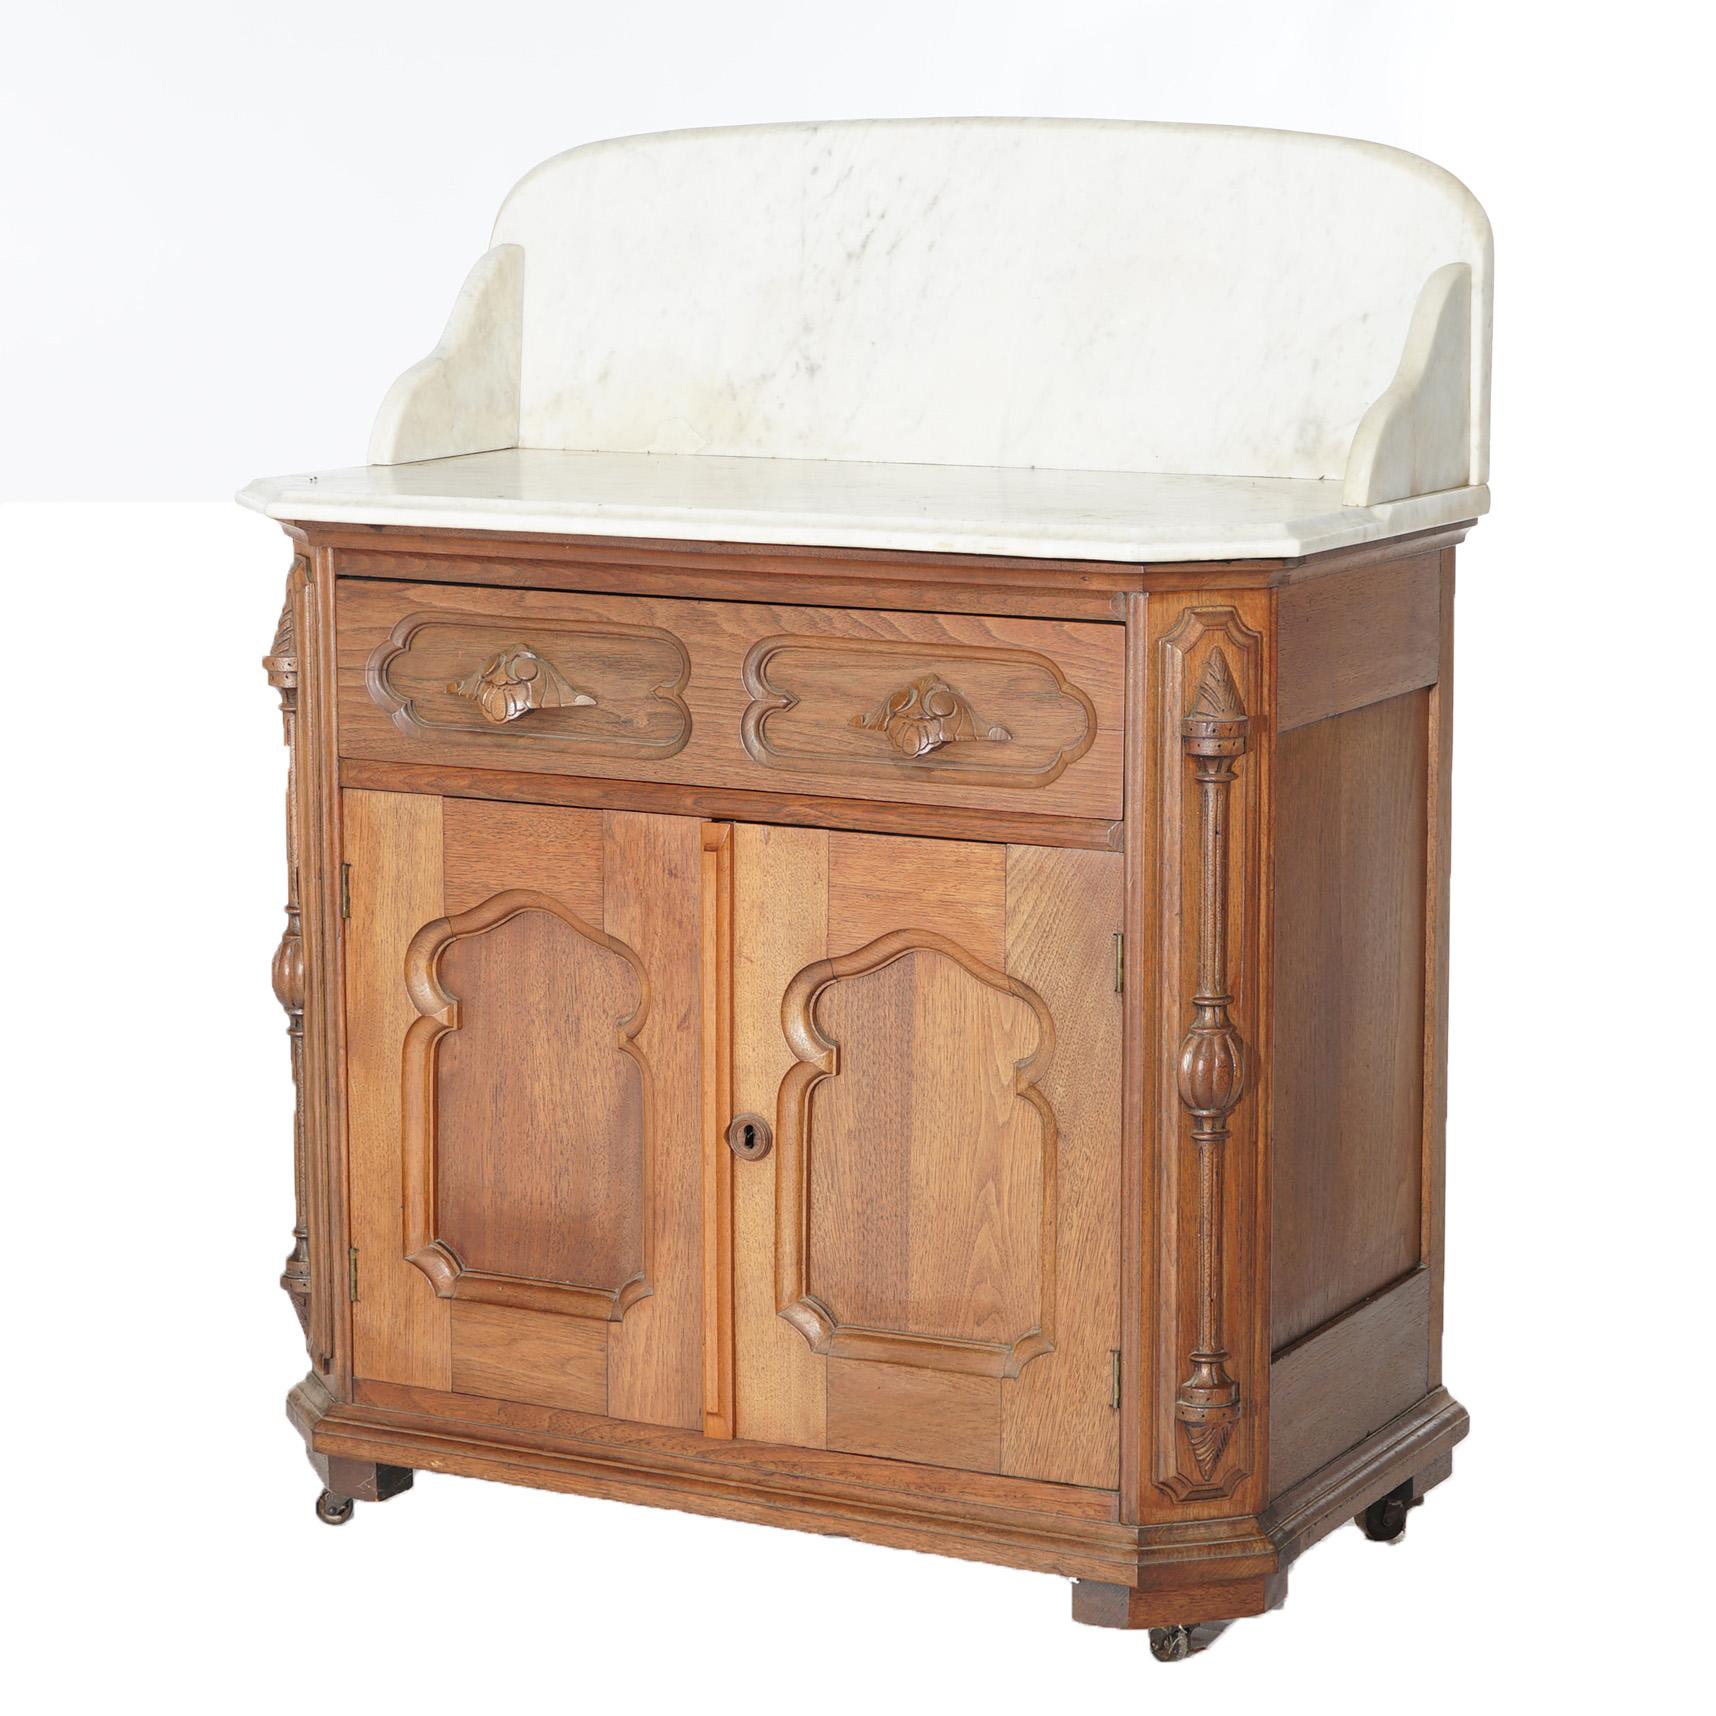 An antique Victorian commode offers beveled marble top and backsplash over walnut case having upper frieze drawer over double door blind cabinet with recessed arch panels, c1880

Measures - 41